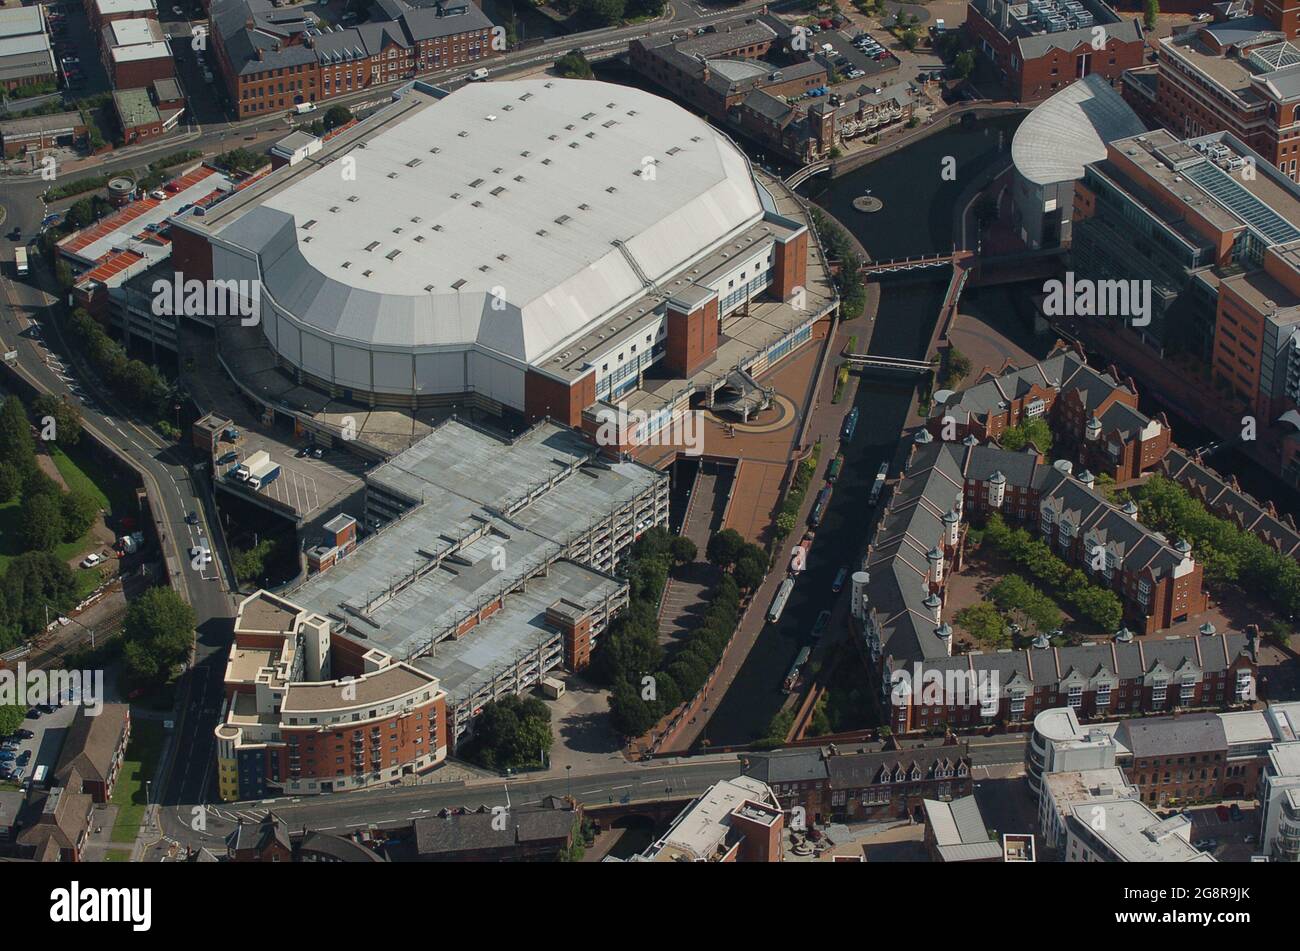 Aerial view of the National Indoor Arena in Birmingham England Stock Photo